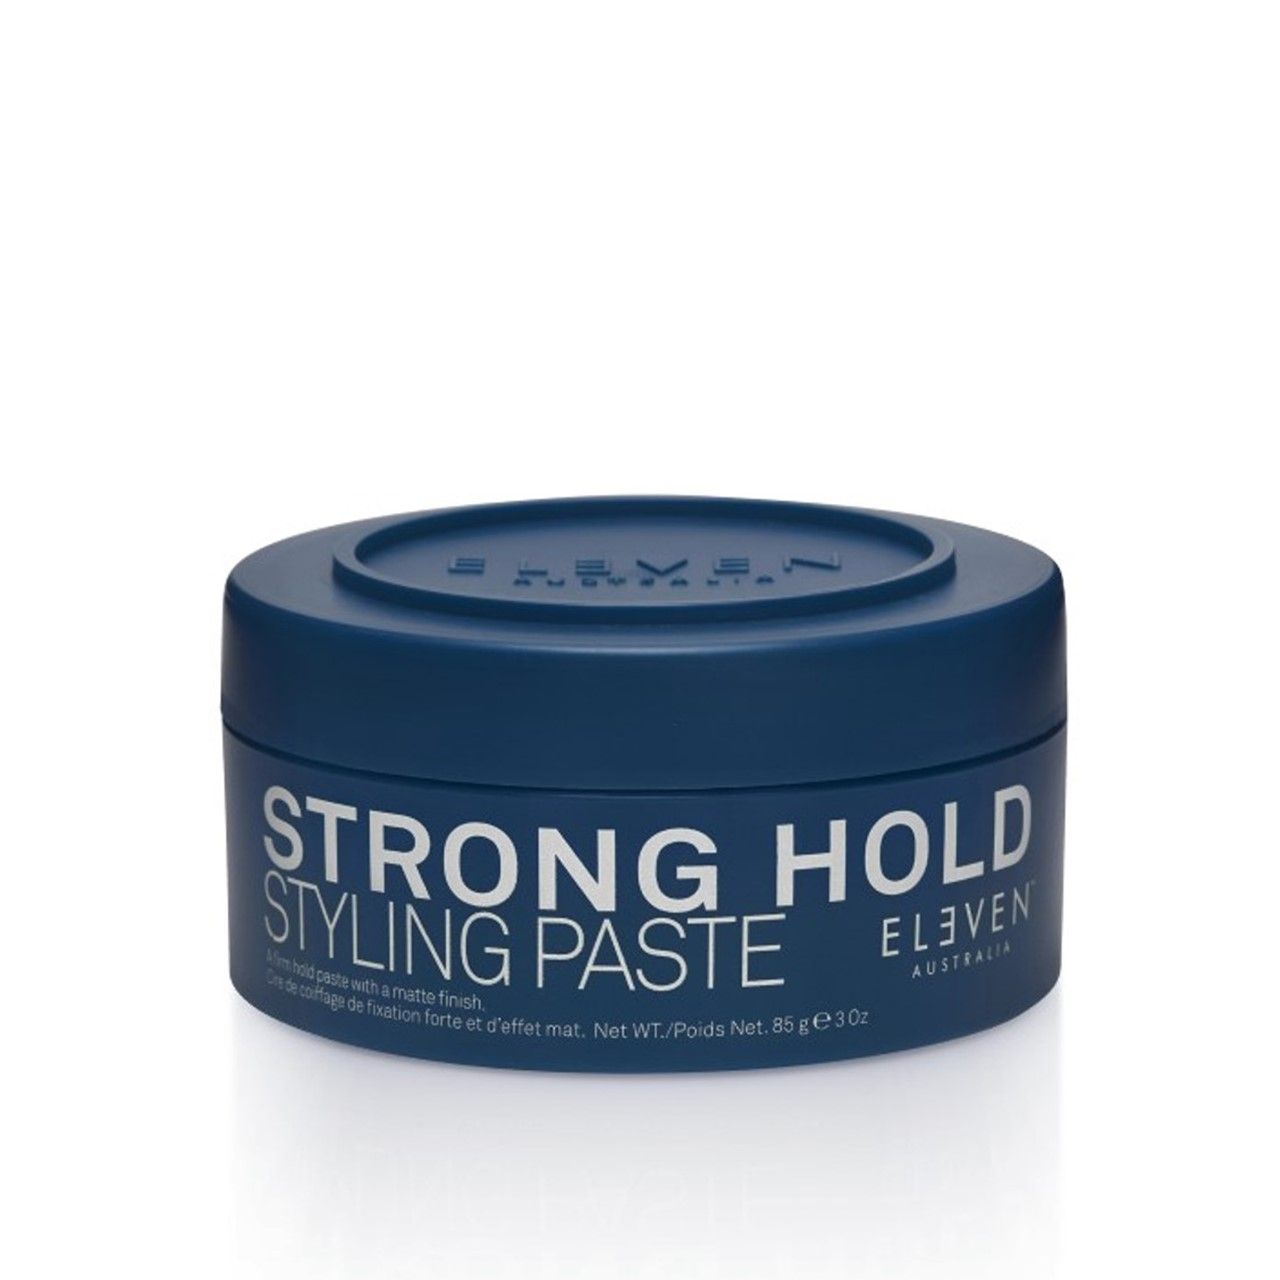 Eleven Australia Strong Hold Styling Paste 85g (3 oz)